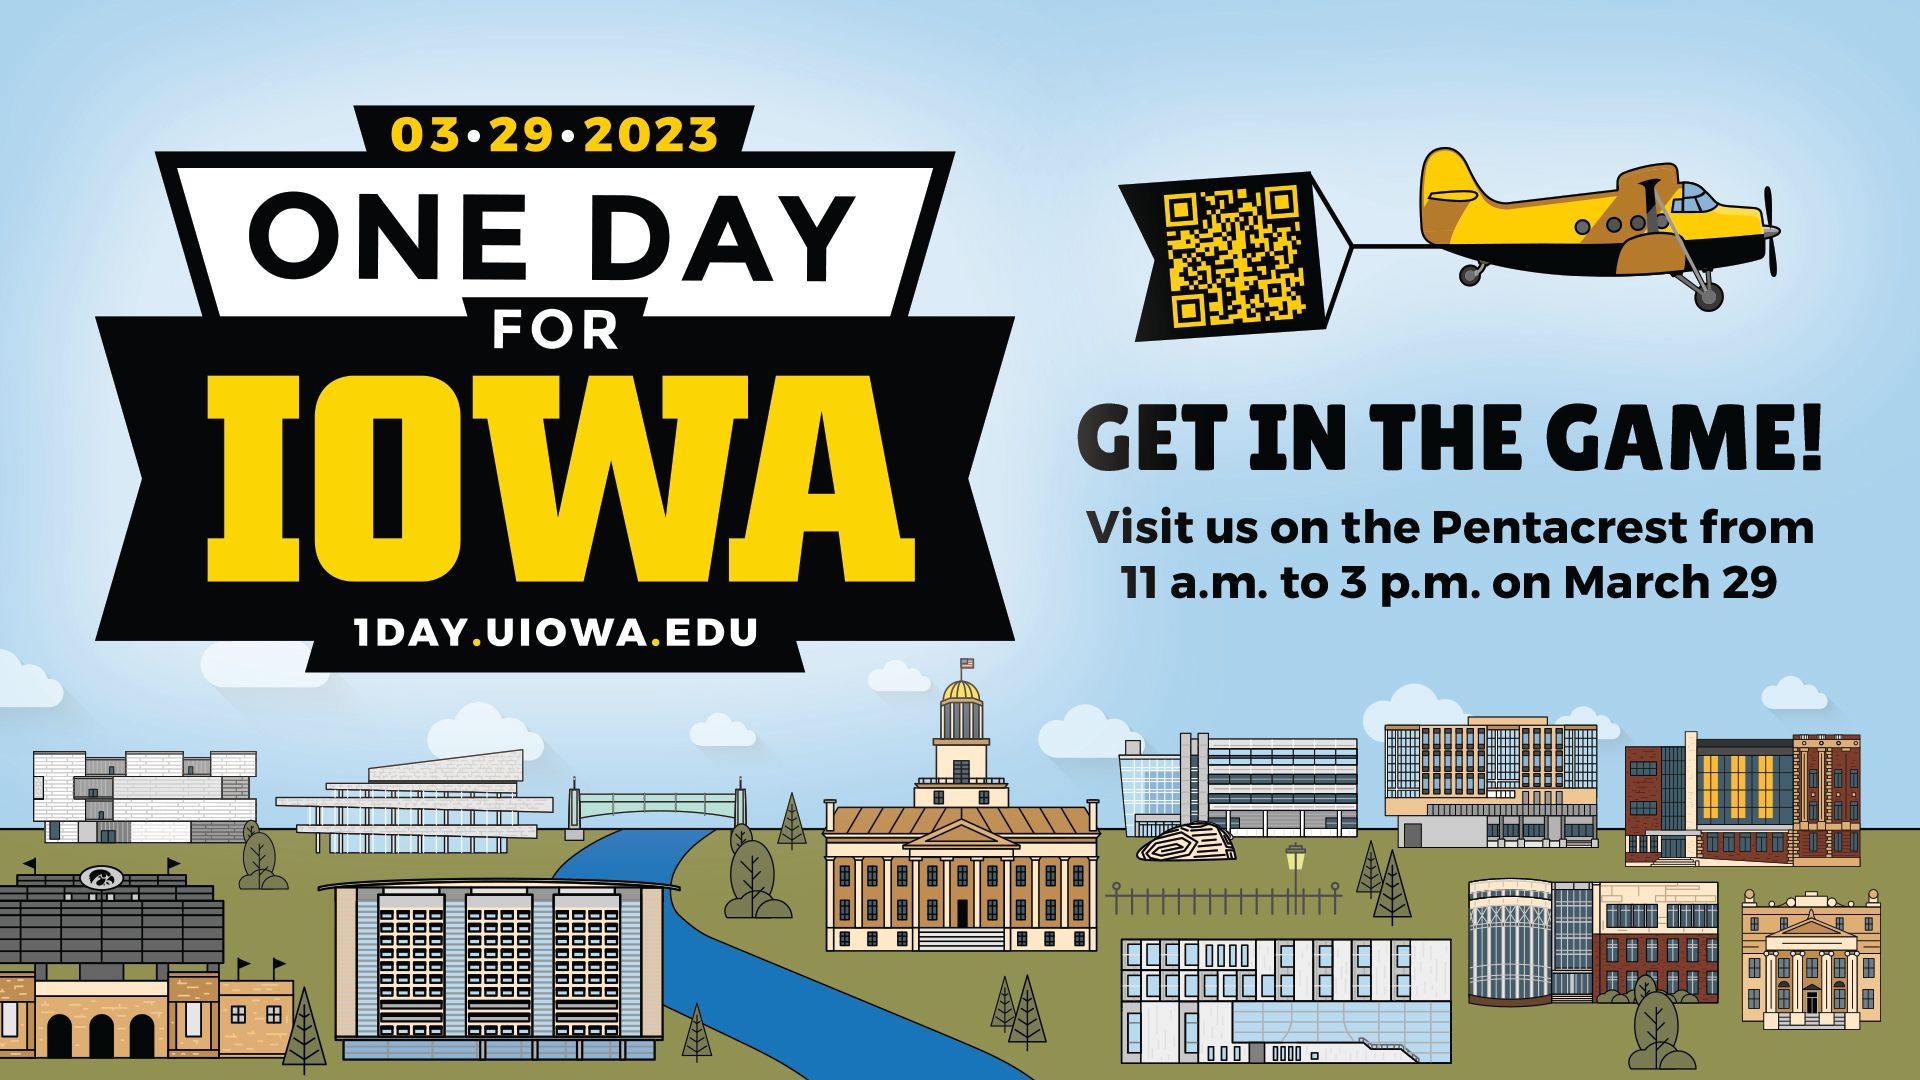 One Day for Iowa: Get in the game - Visit us on the Pentacrest from 11-3 on Wednesday March 29